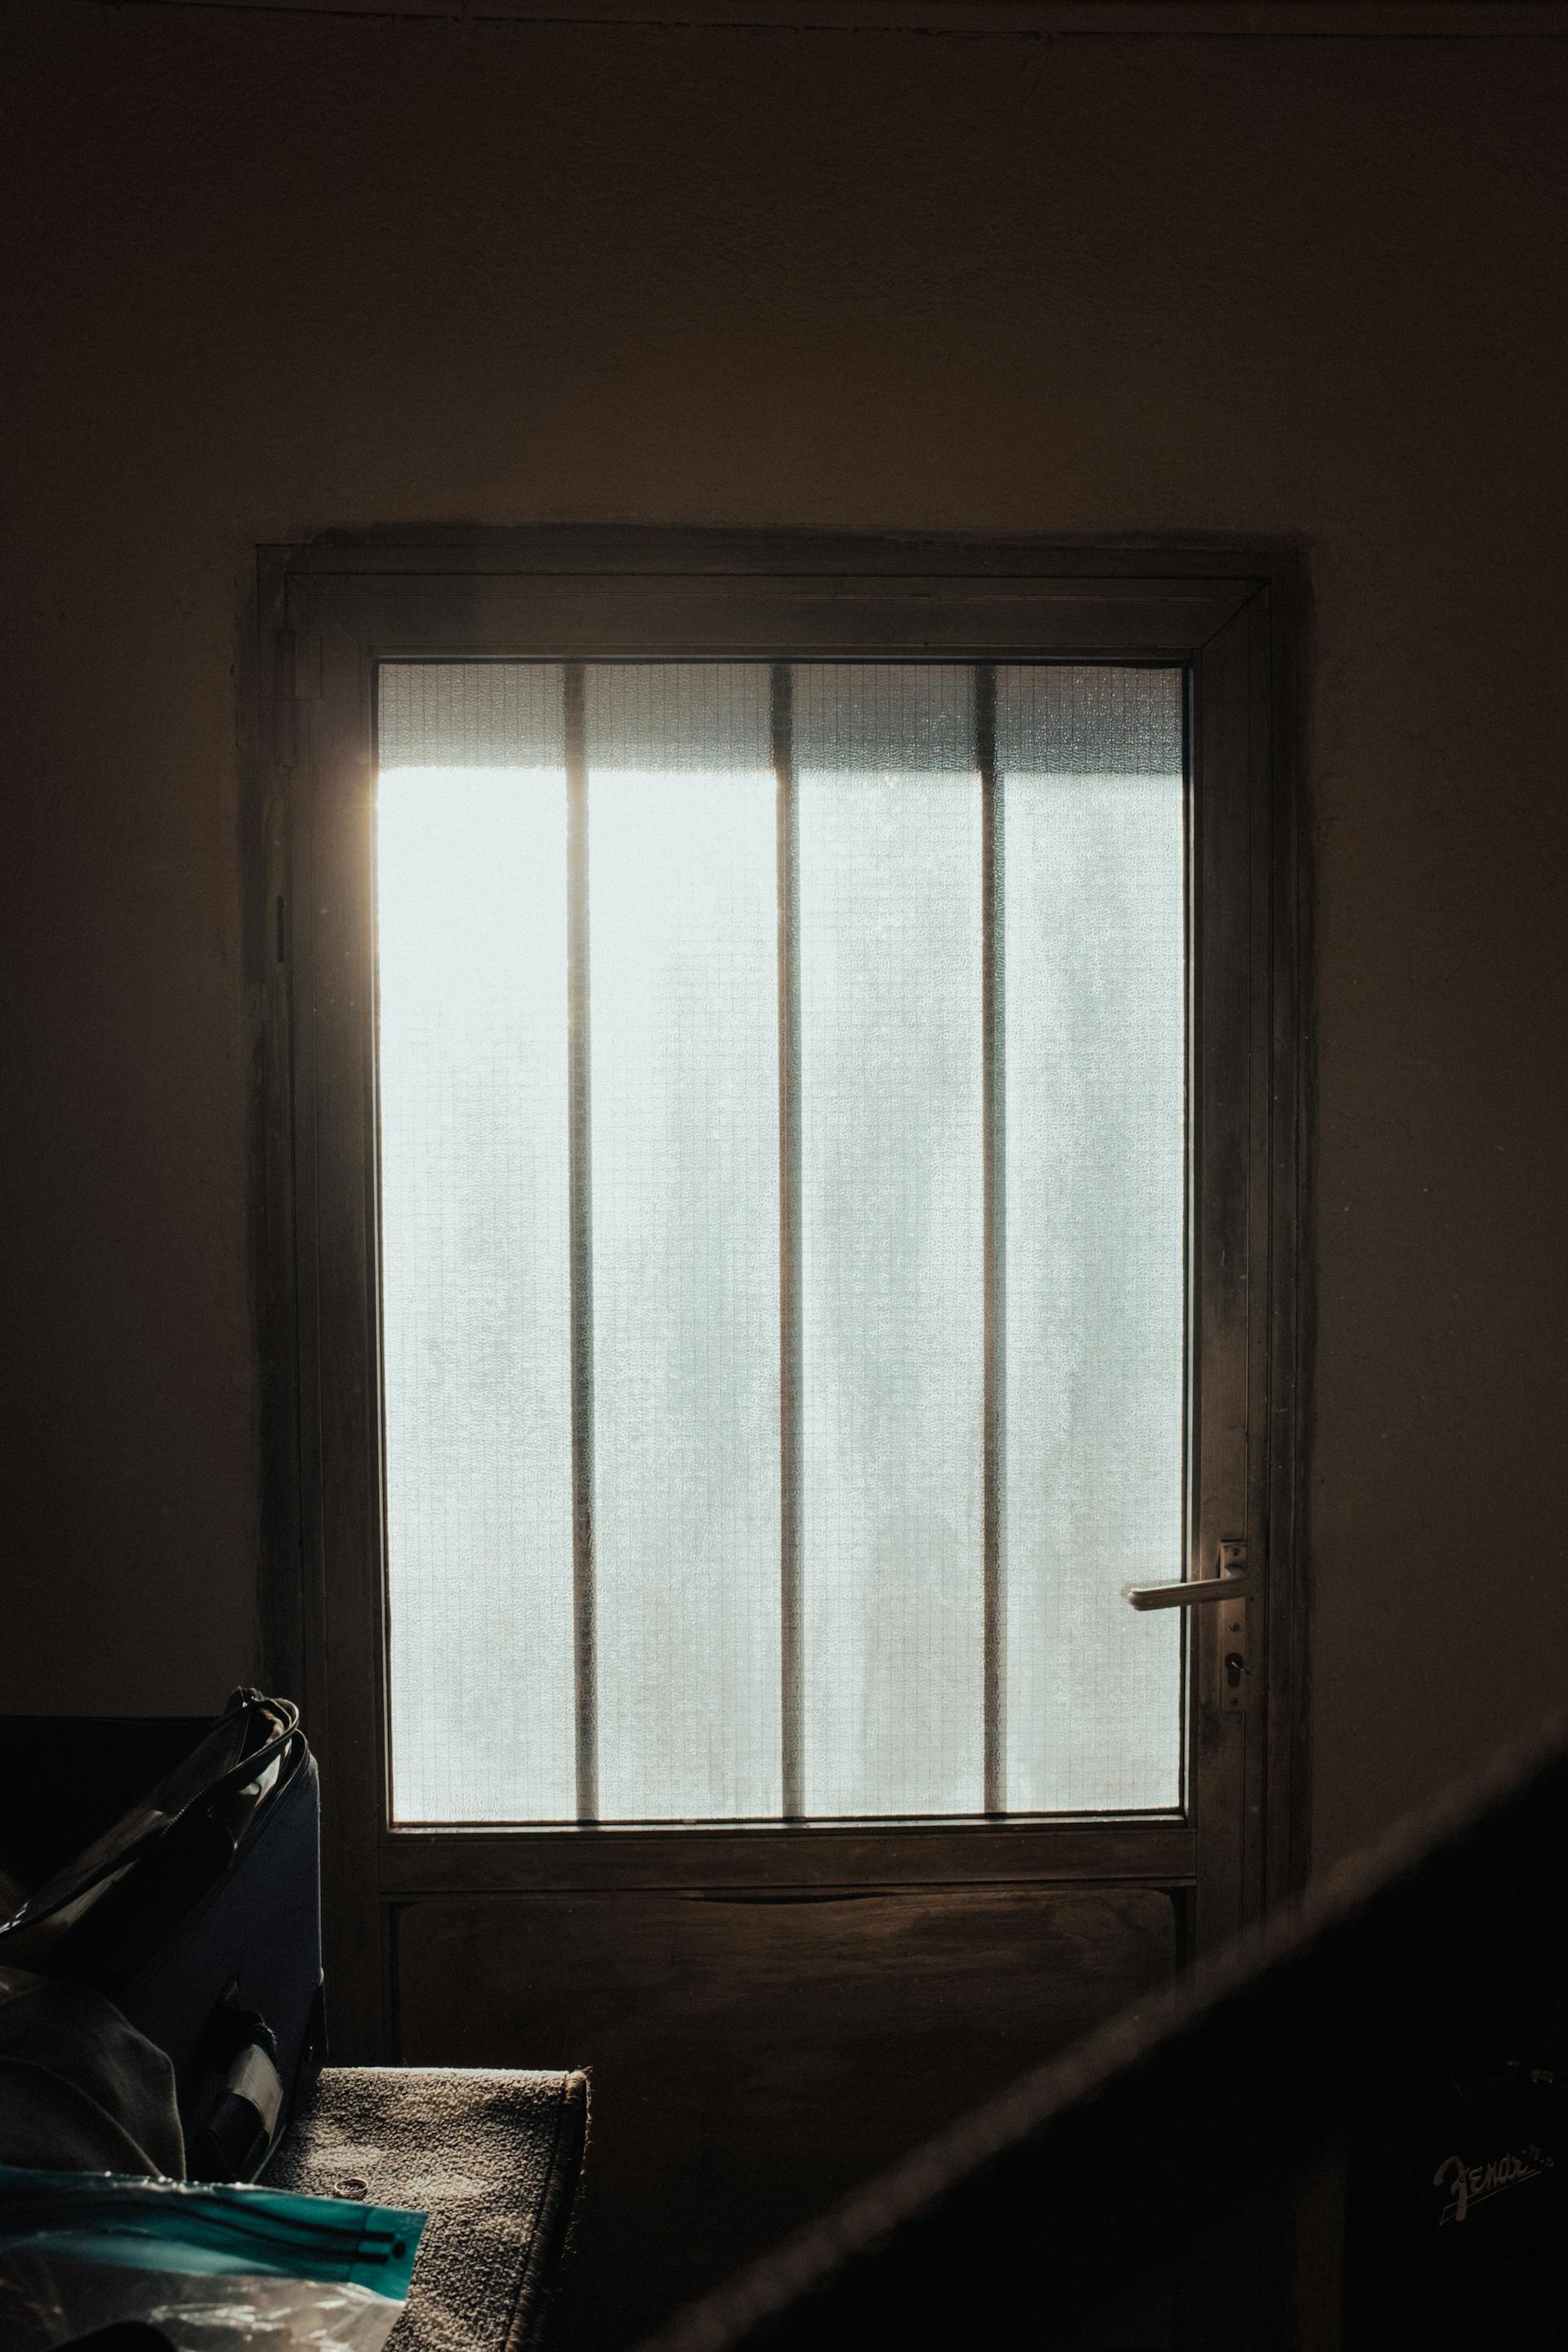 A closed door from the inside | Source: Pexels